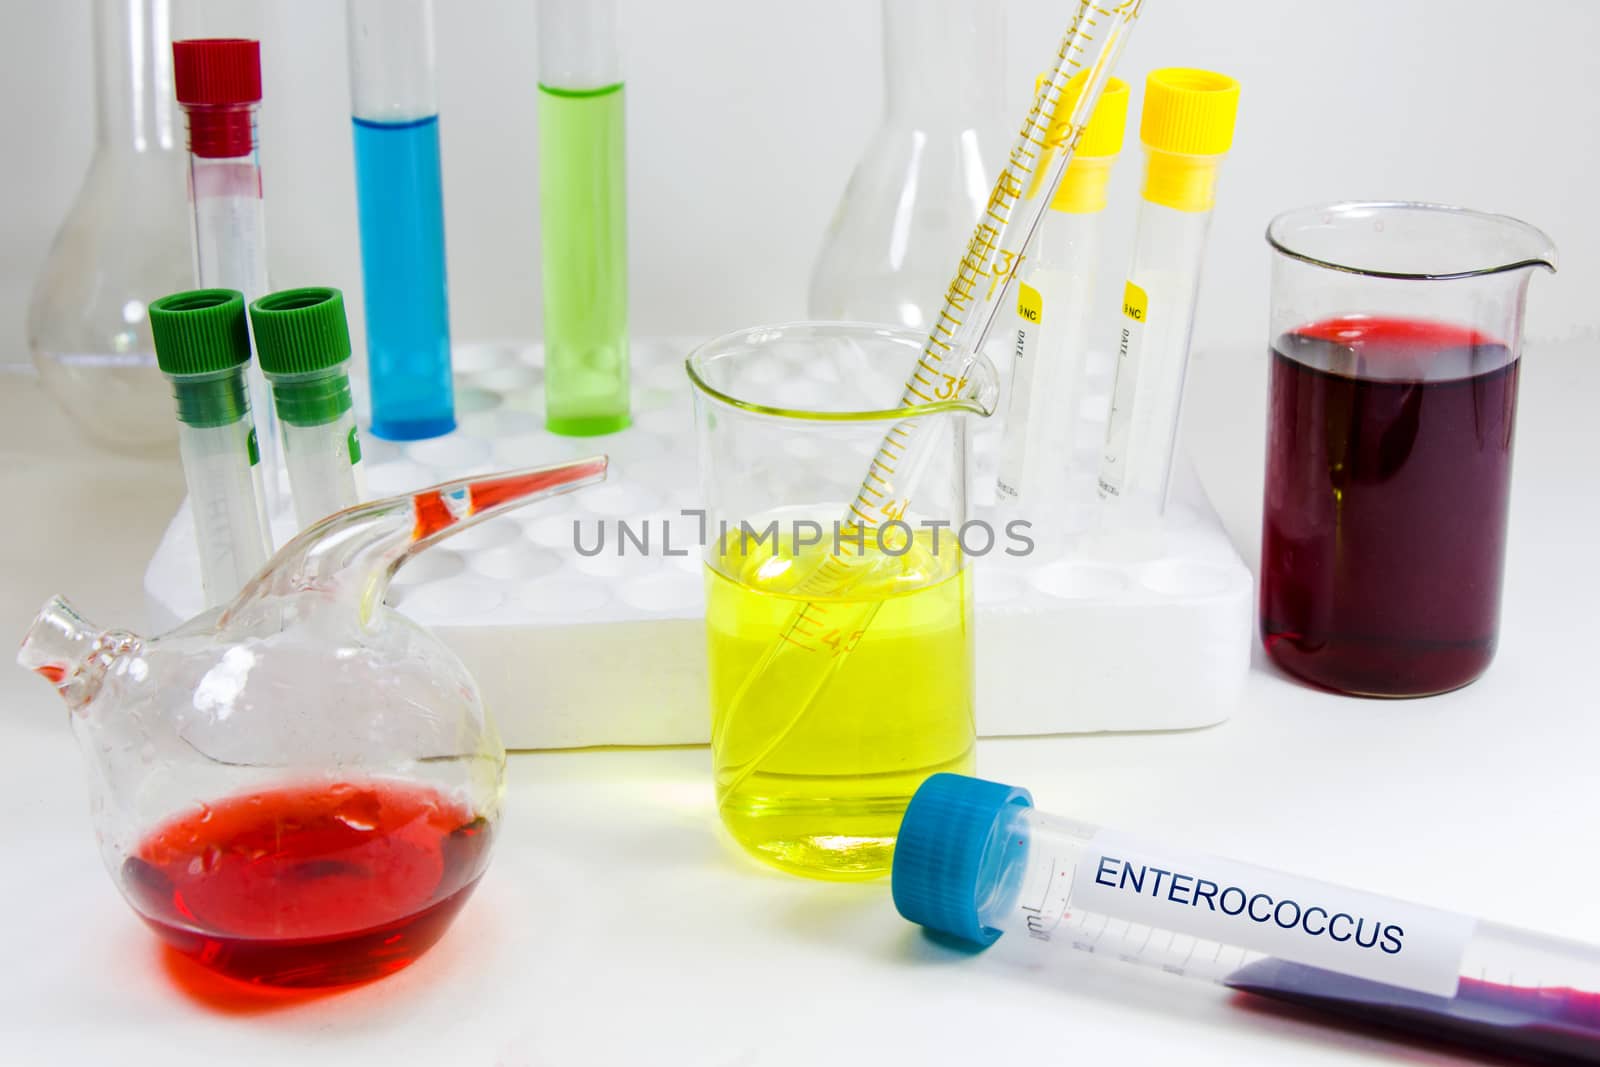 Enterococcus blood test sample on the white background by Taidundua